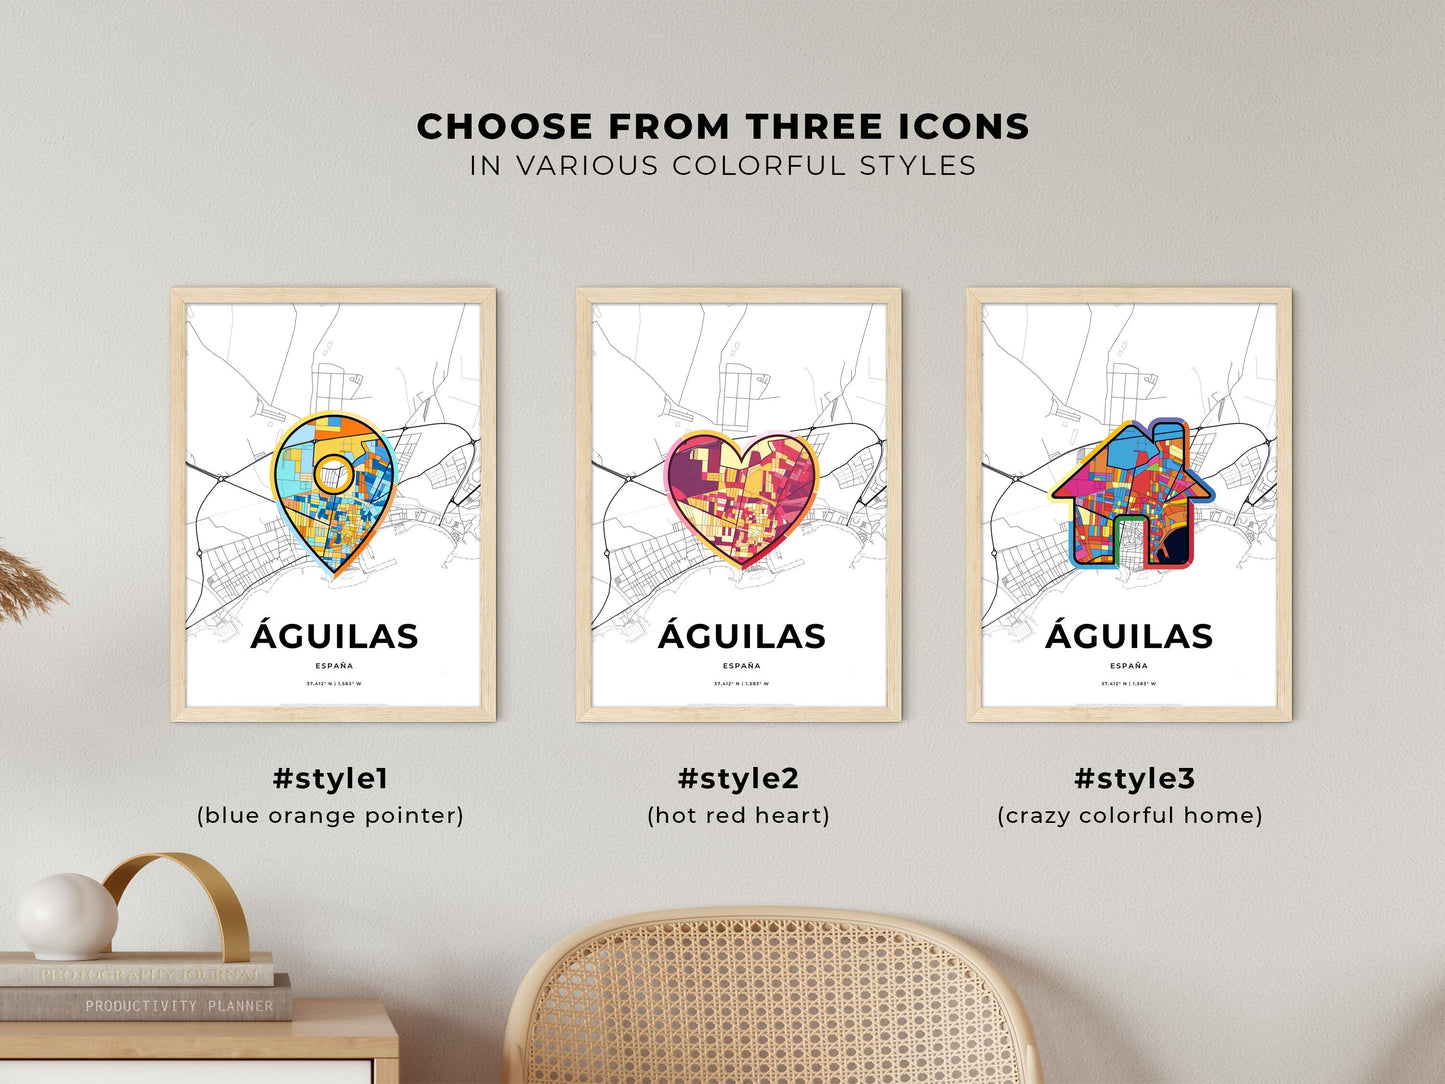 ÁGUILAS SPAIN minimal art map with a colorful icon. Where it all began, Couple map gift.